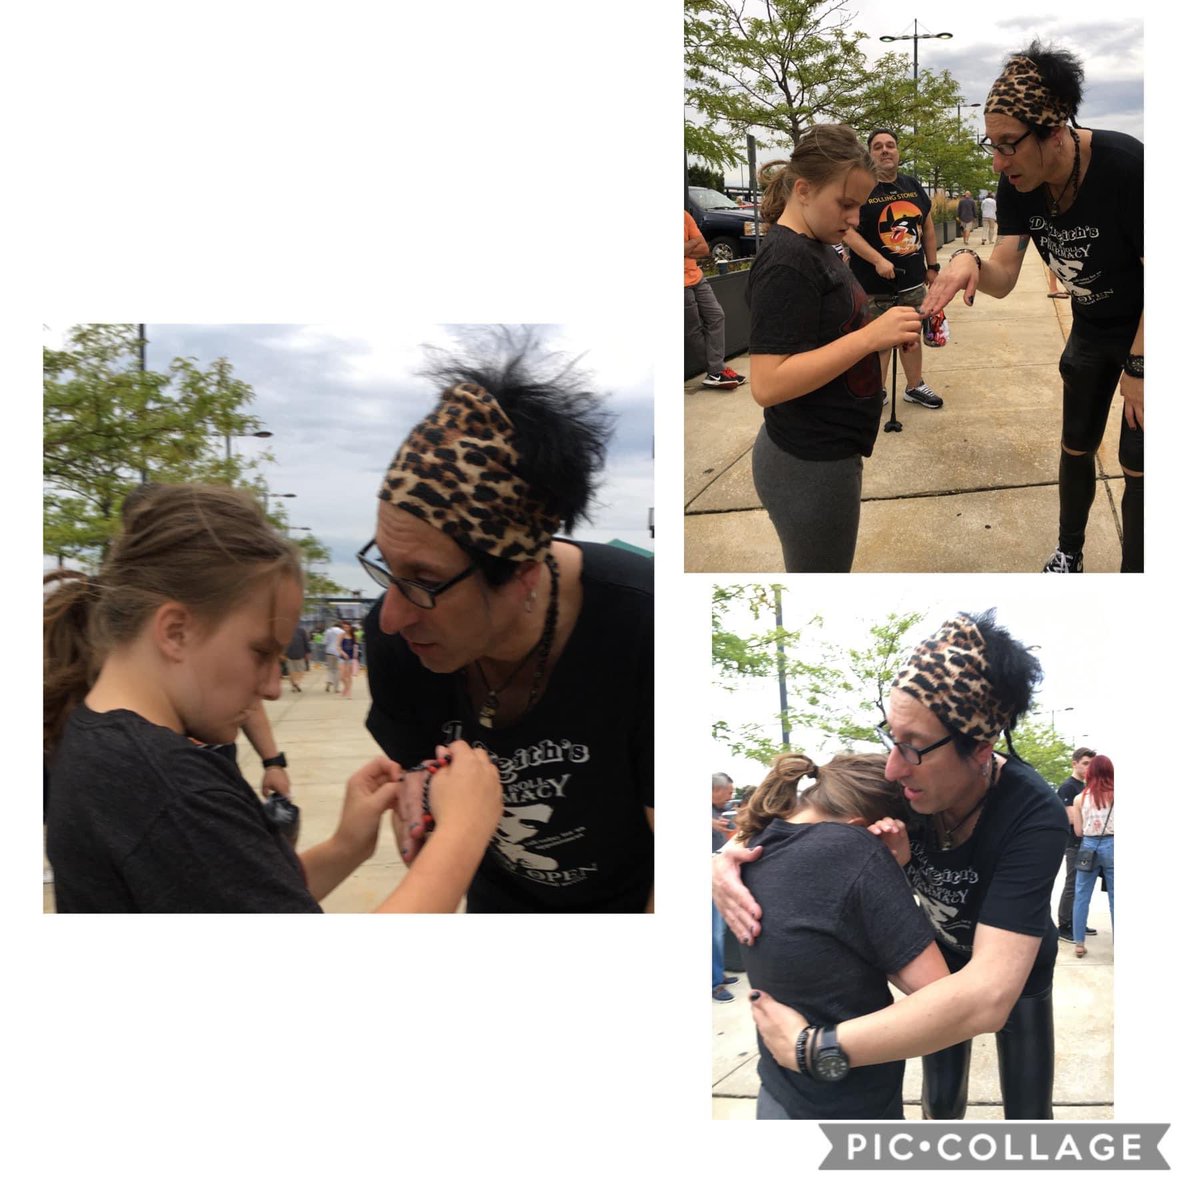 On this #AutismAwarenessDay, I celebrate this moment. Emma was having a tough time and was not able to say what was wrong. Someone special just knew she needed a hug and to be told that everything will be OK. Empathy matters! @jackybambam933 @933WMMR @mor100 #EmmaRocksAutism